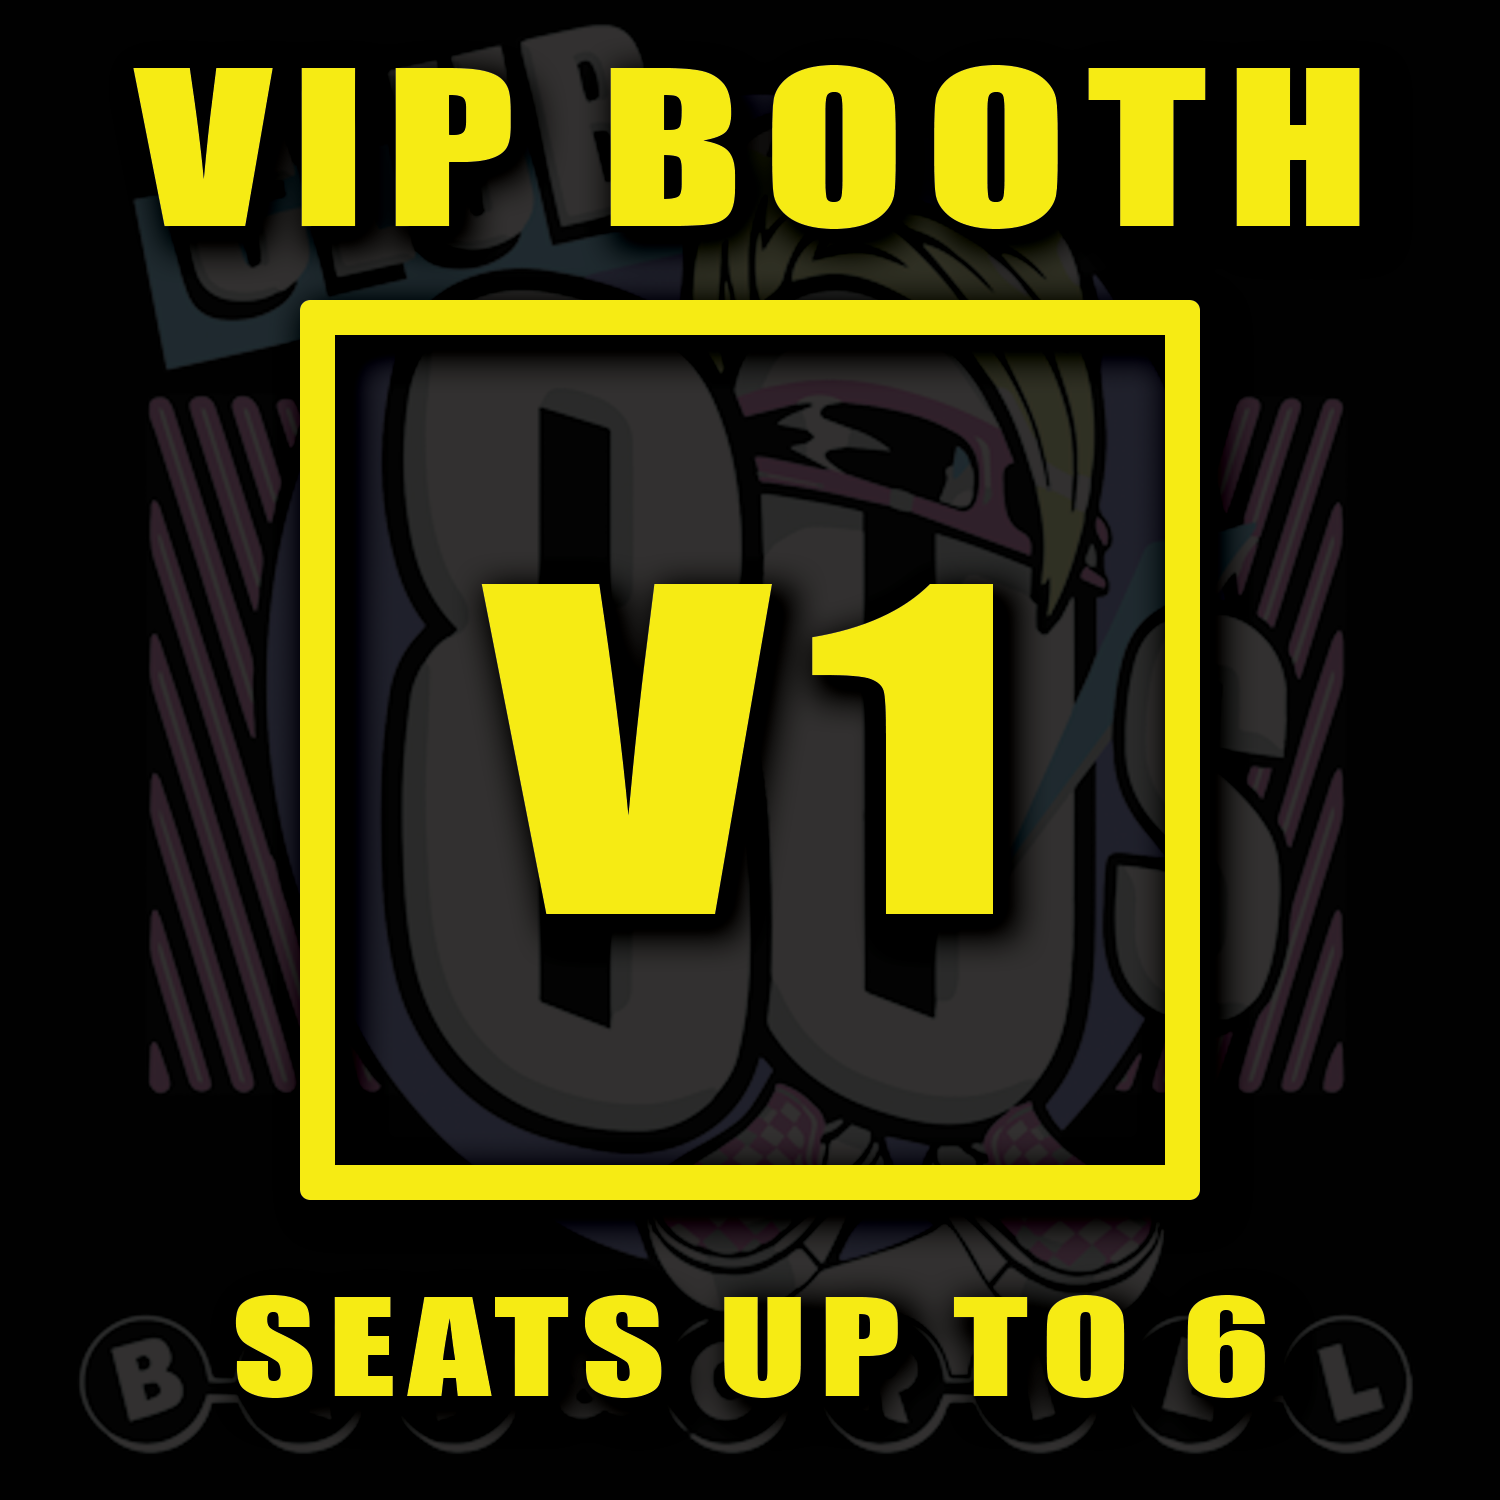 VIP BOOTH V1